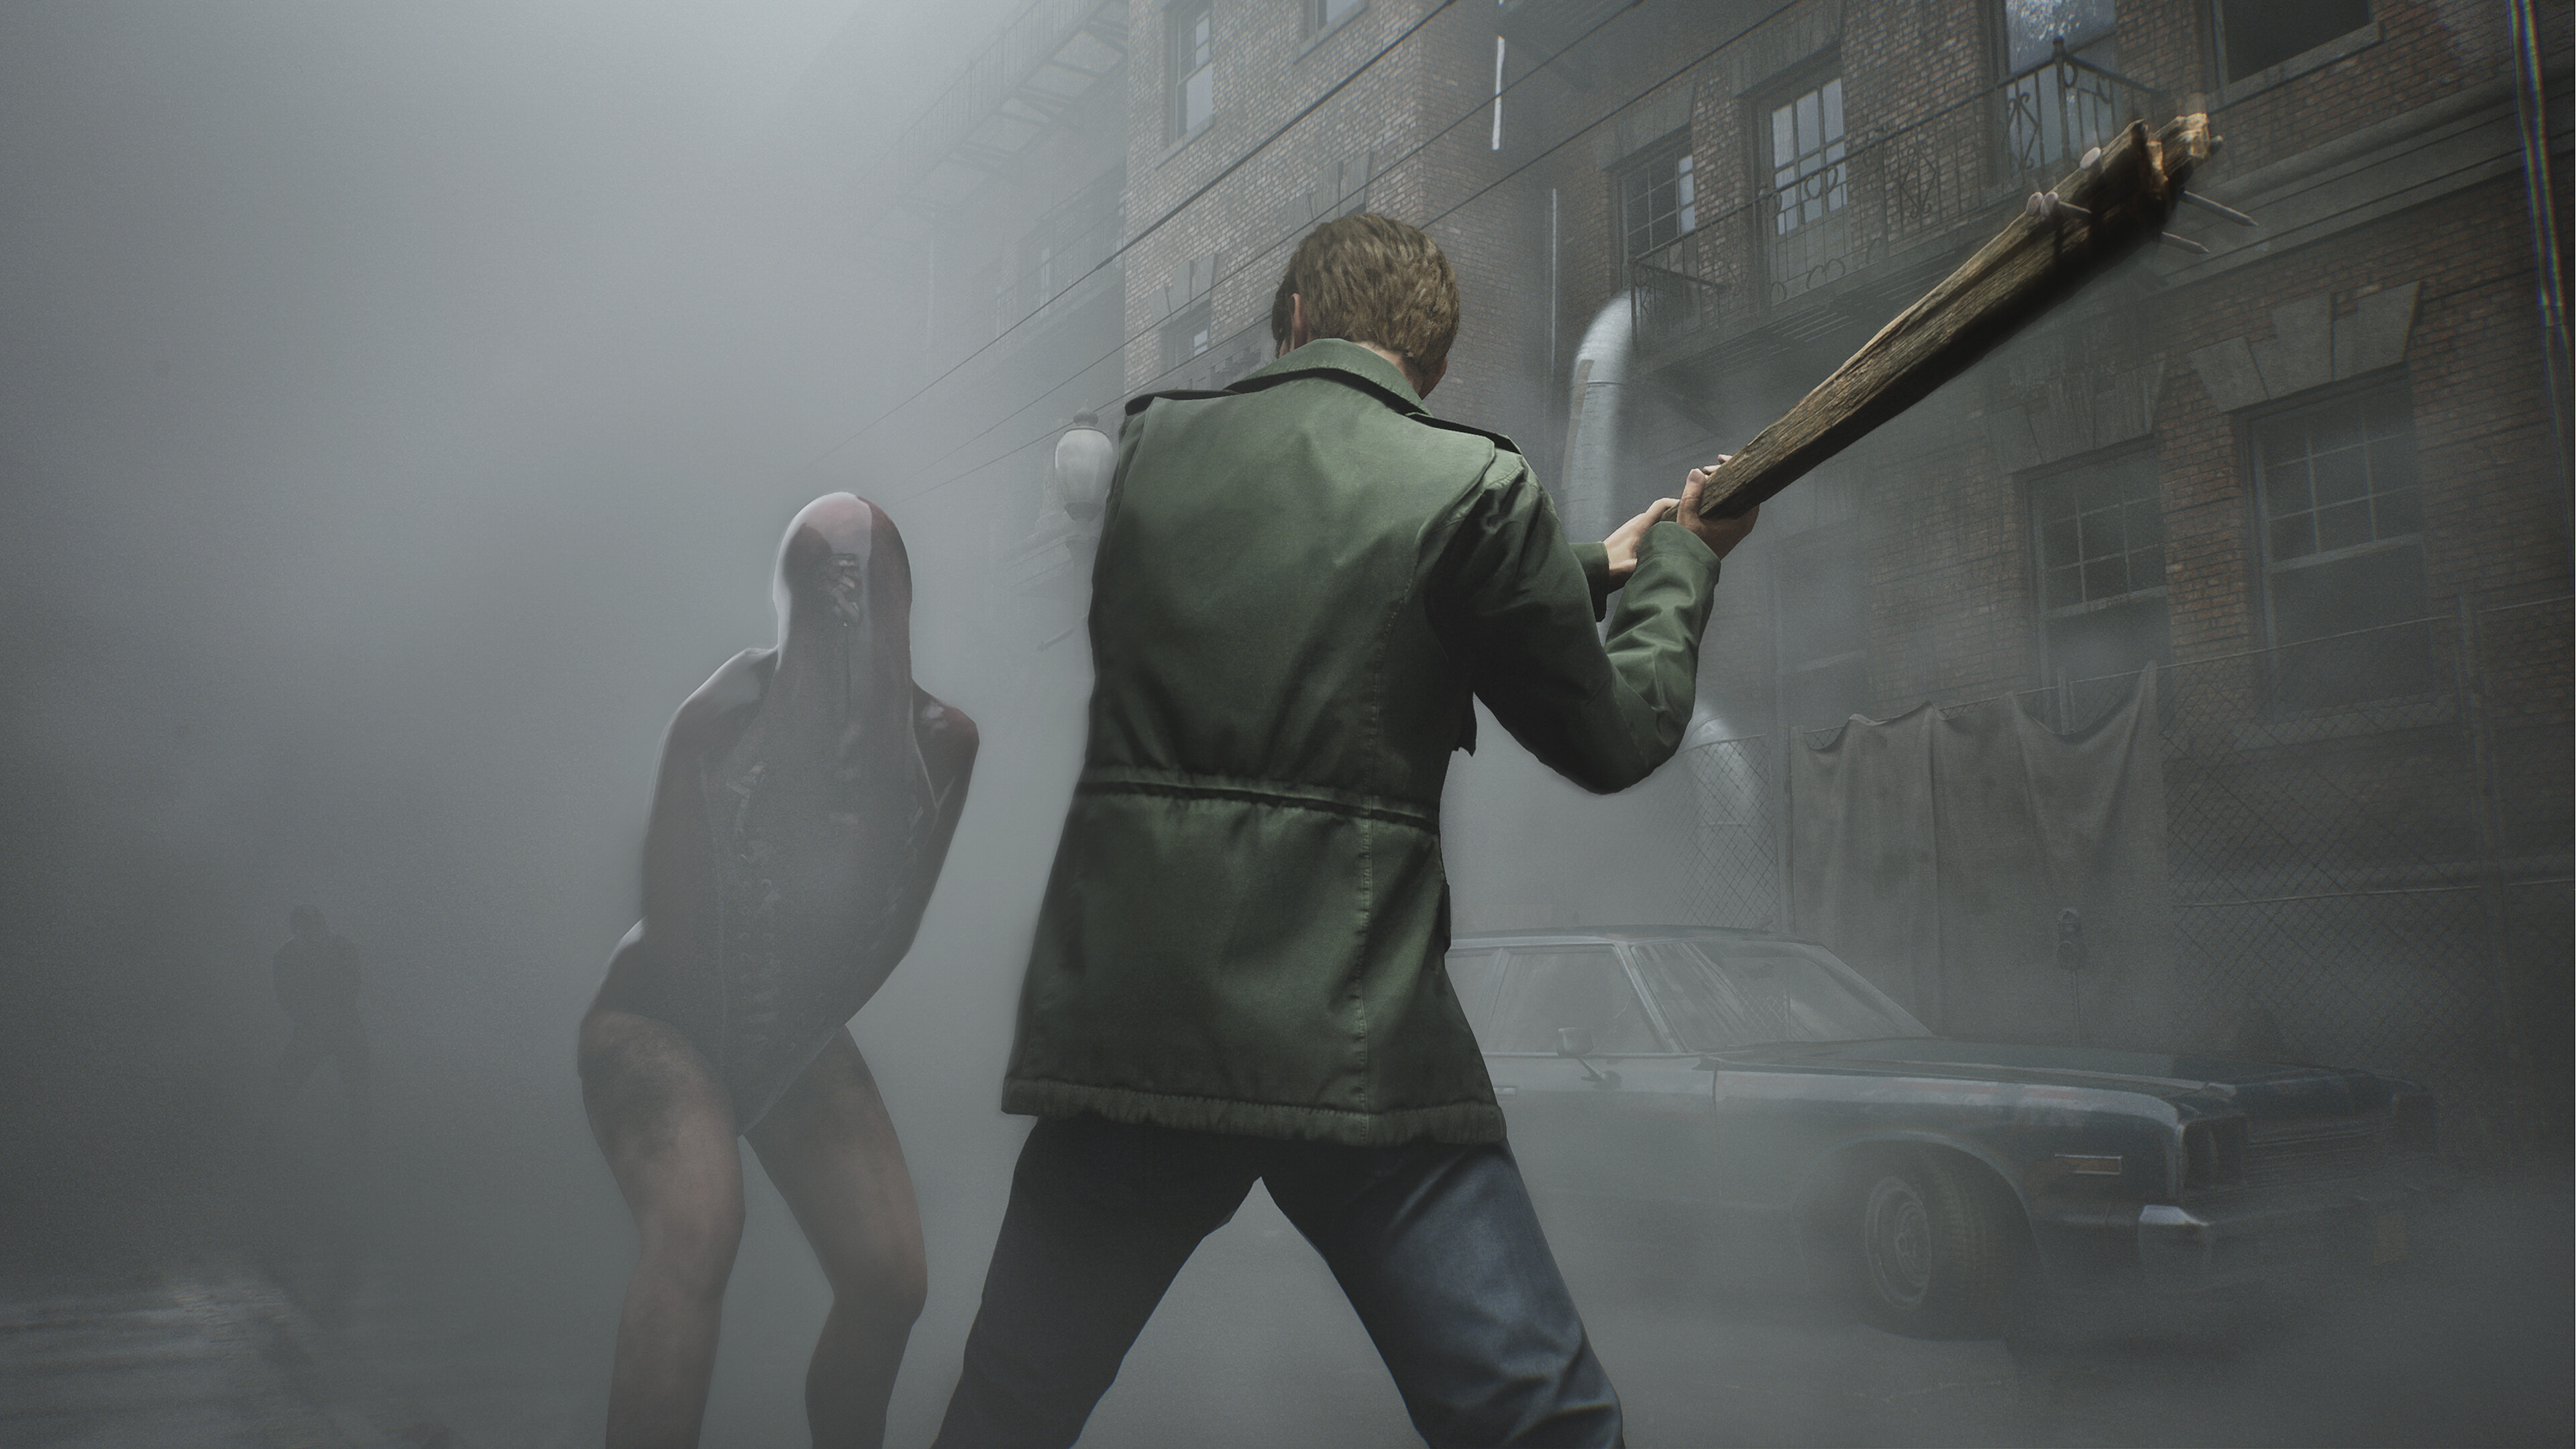 Everything we know about the Silent Hill 2 remake